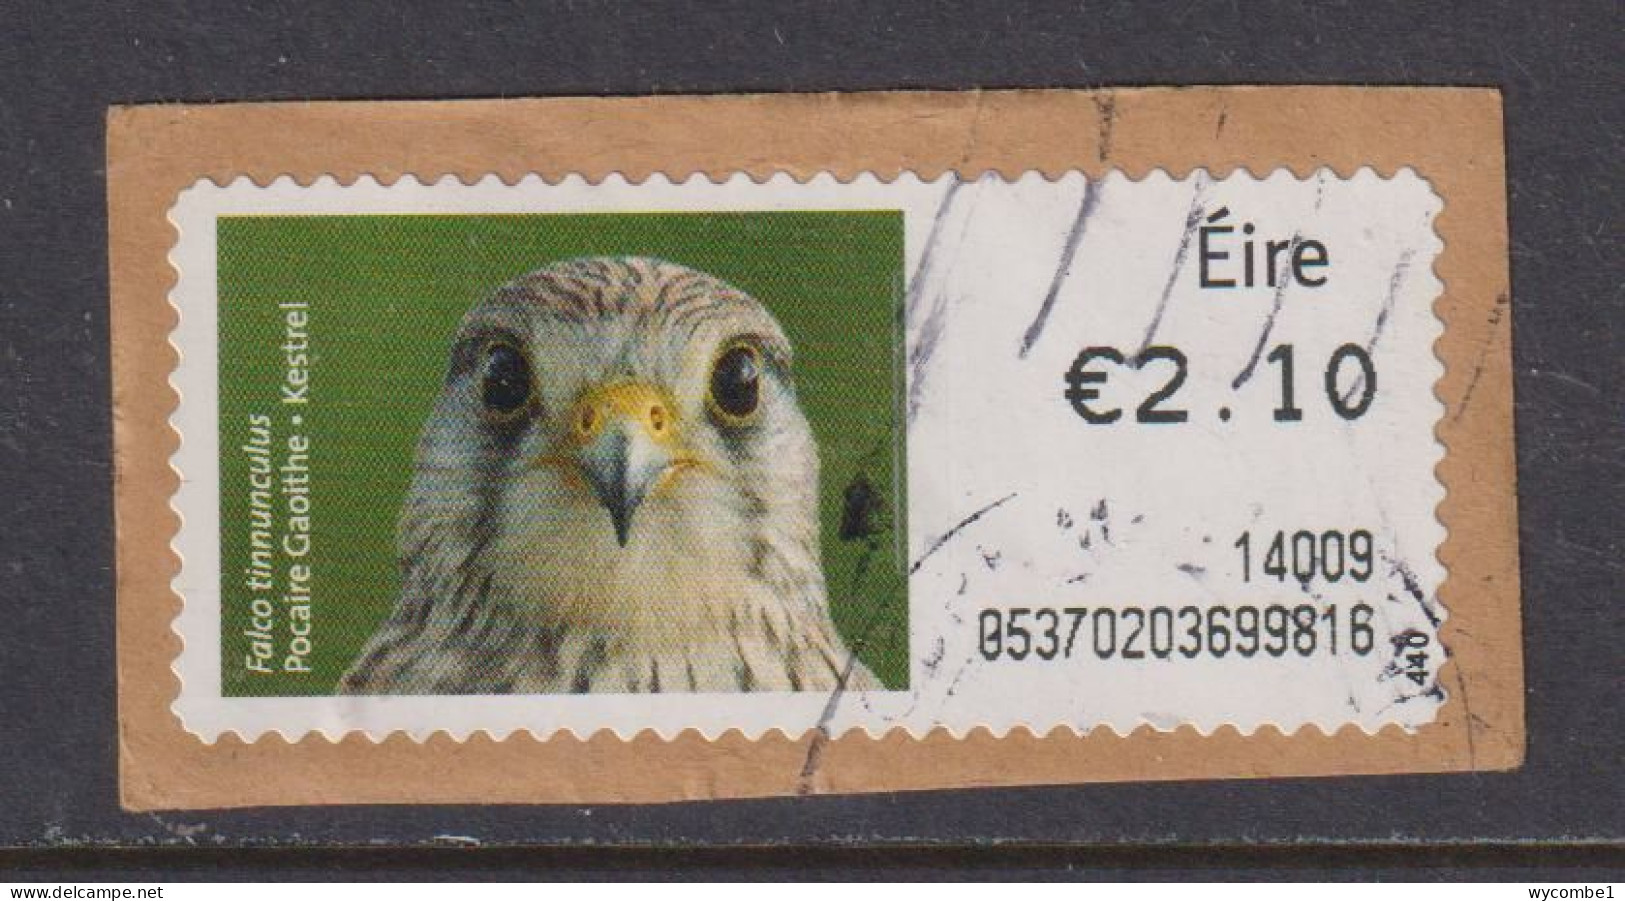 IRELAND  -  2012 Kestrel SOAR (Stamp On A Roll)  CDS  Used On Piece As Scan - Used Stamps